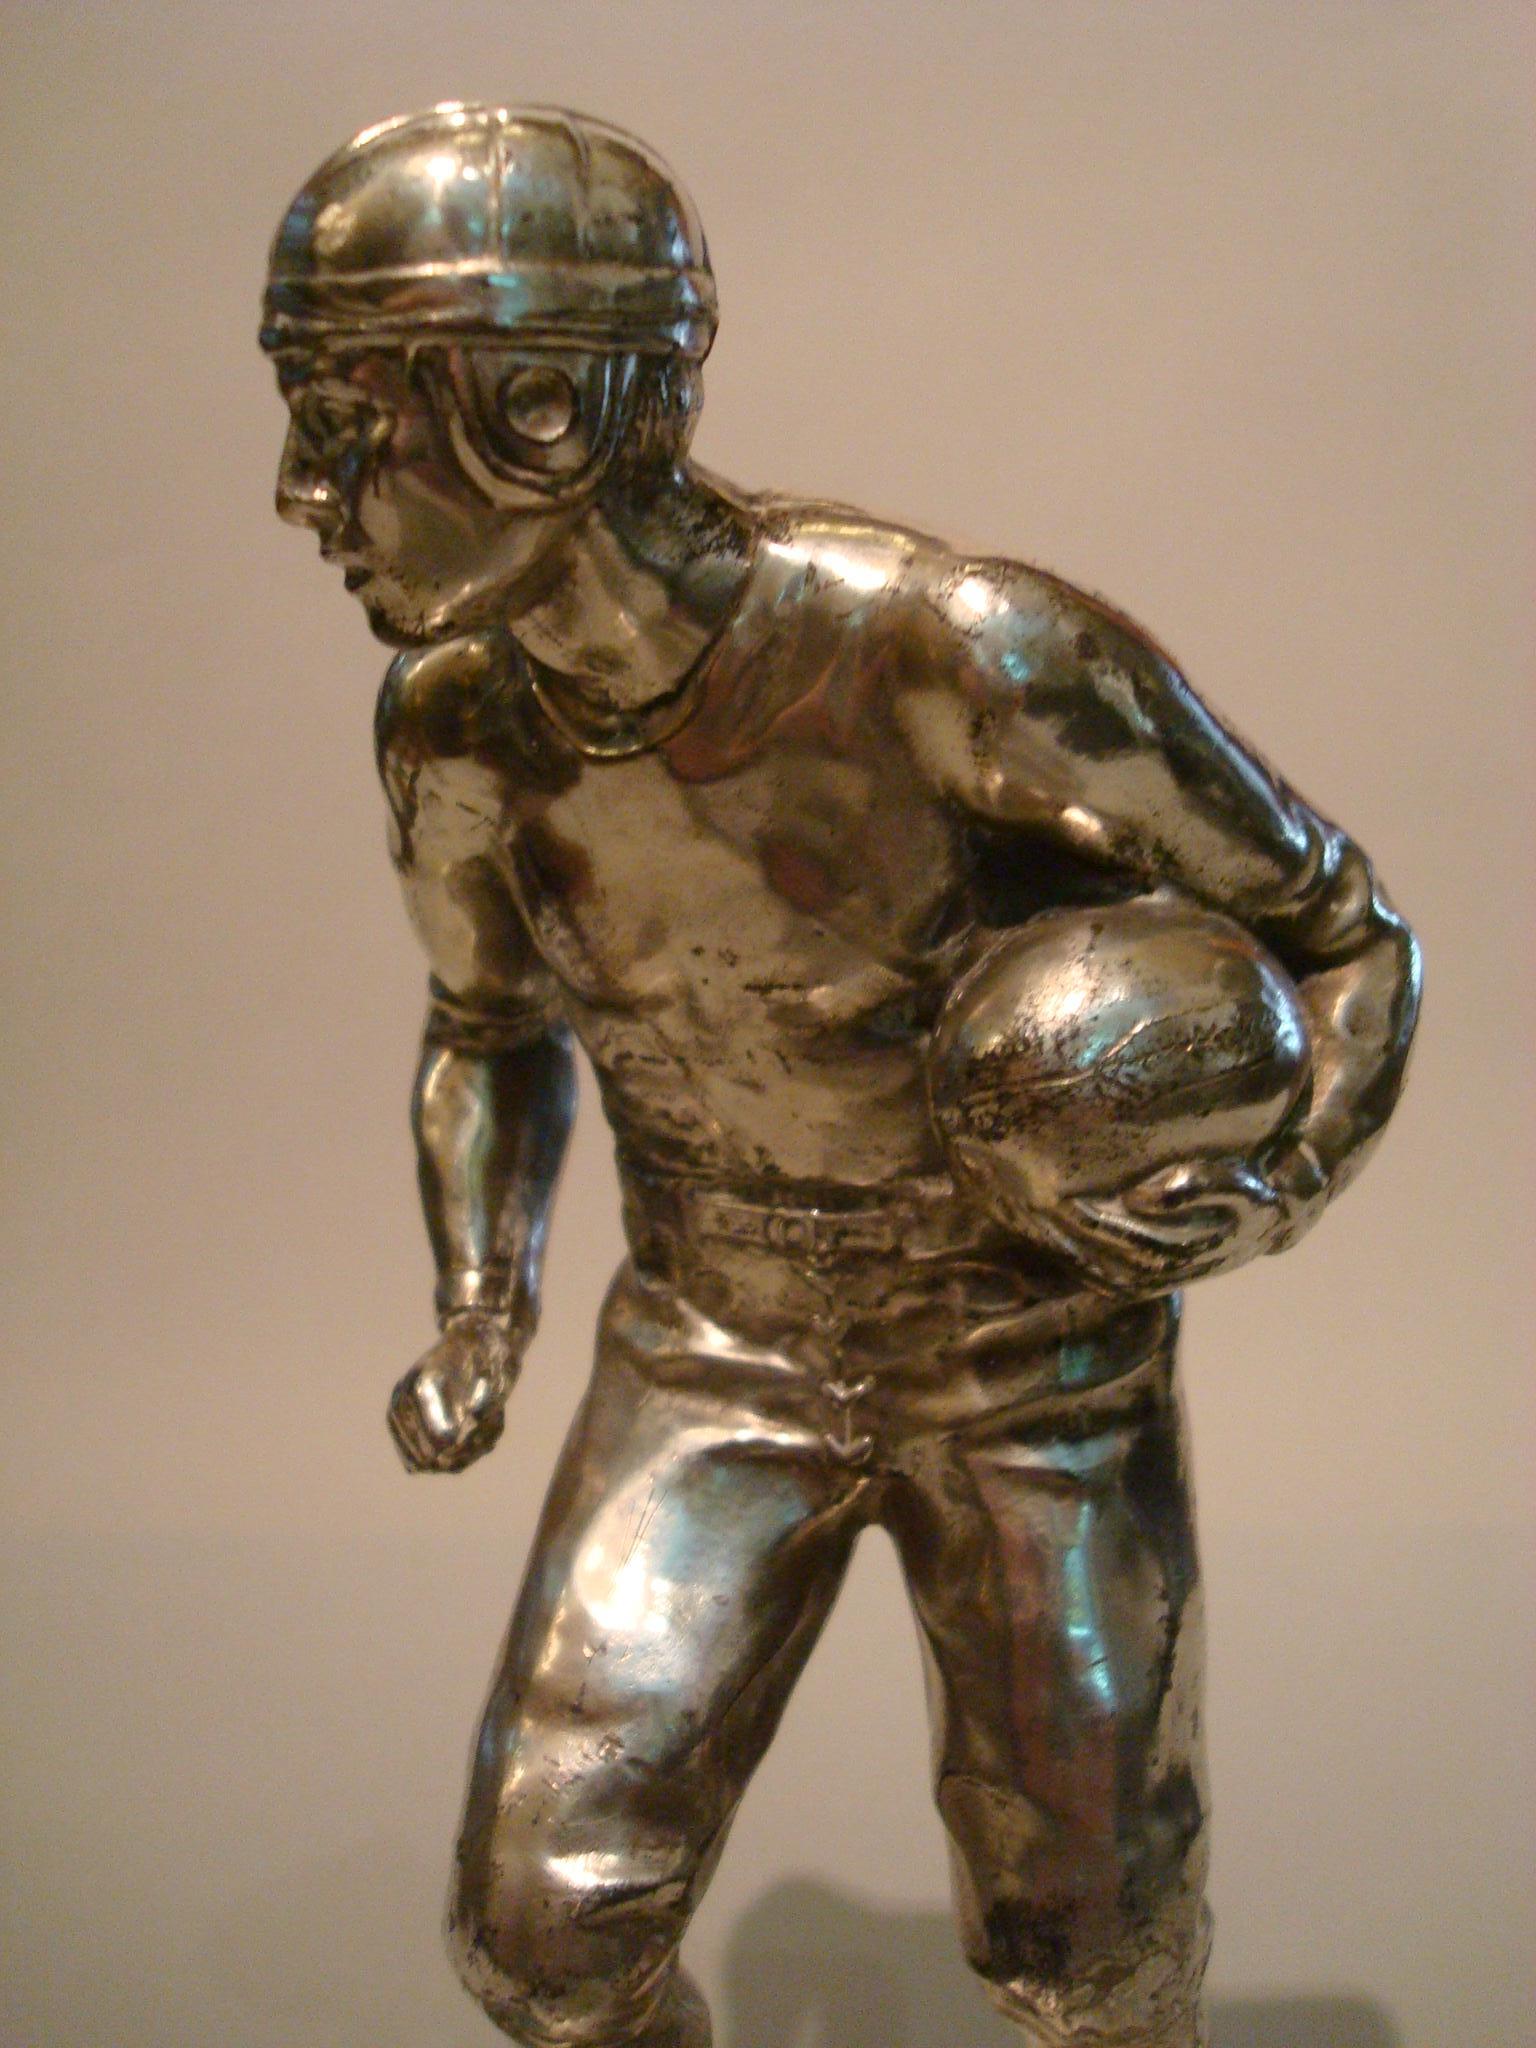 20th Century American Football Sculpture/Trophy, Desk Piece, Silvered Metal, 1930s